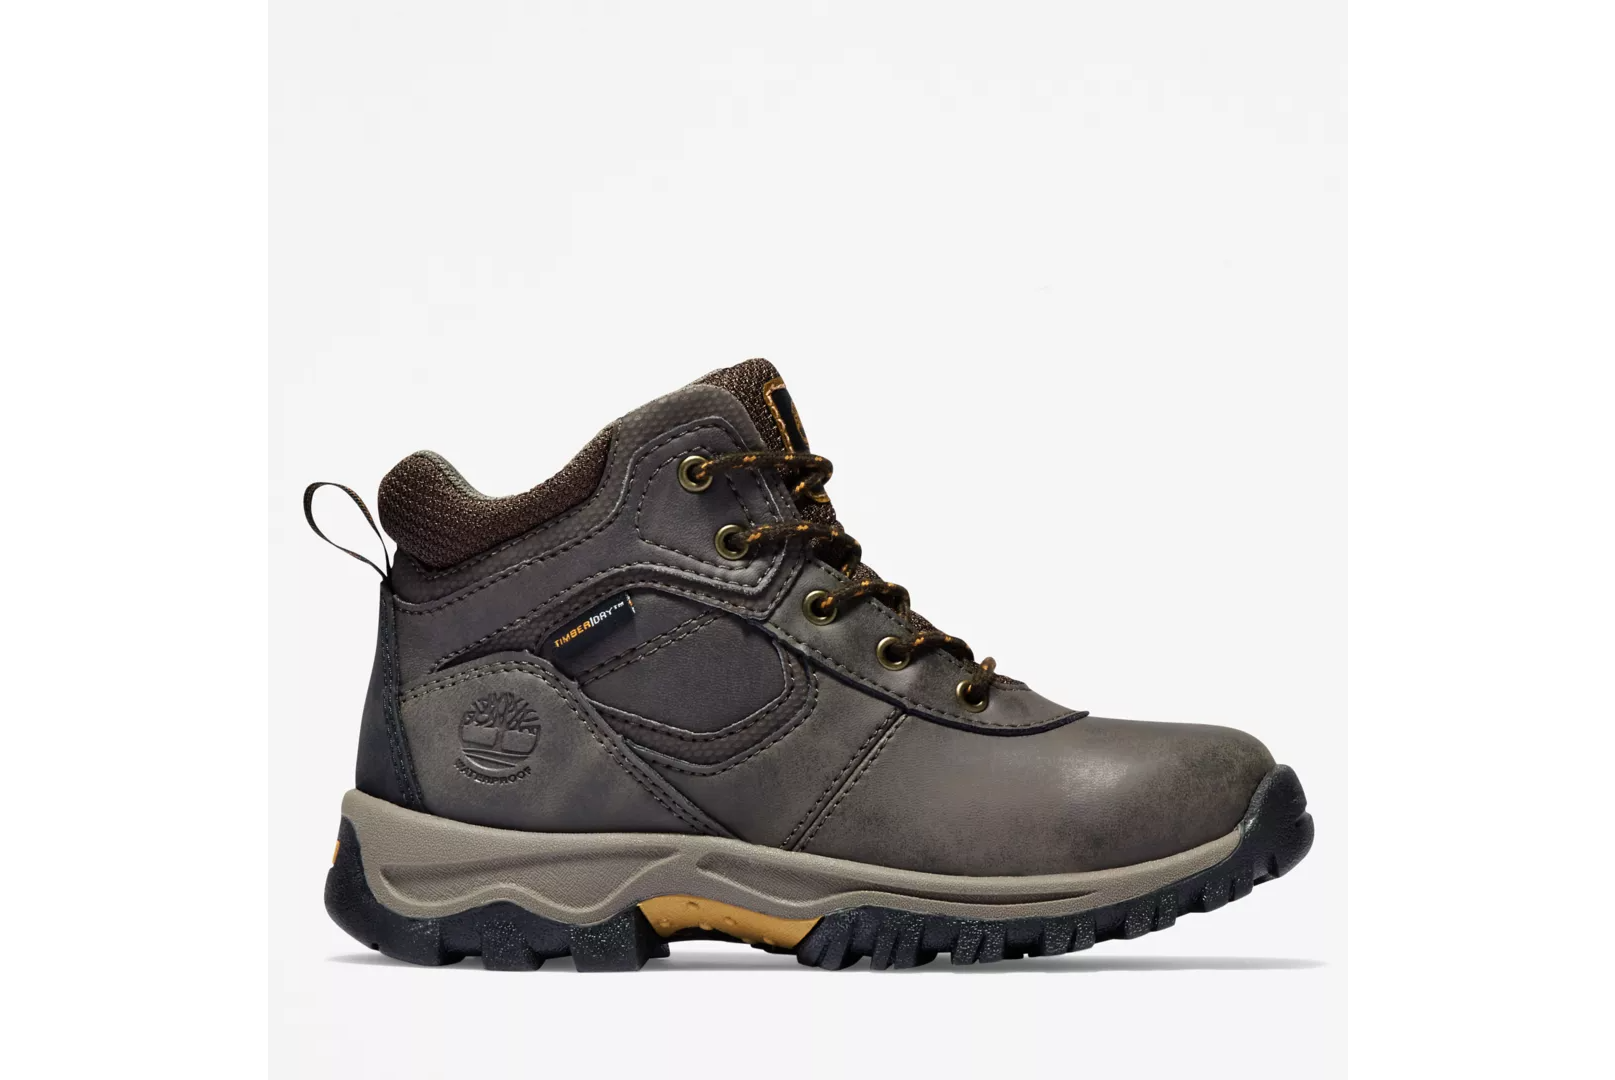 Timberland Youth Mt Maddsen Waterproof Hiking Boots